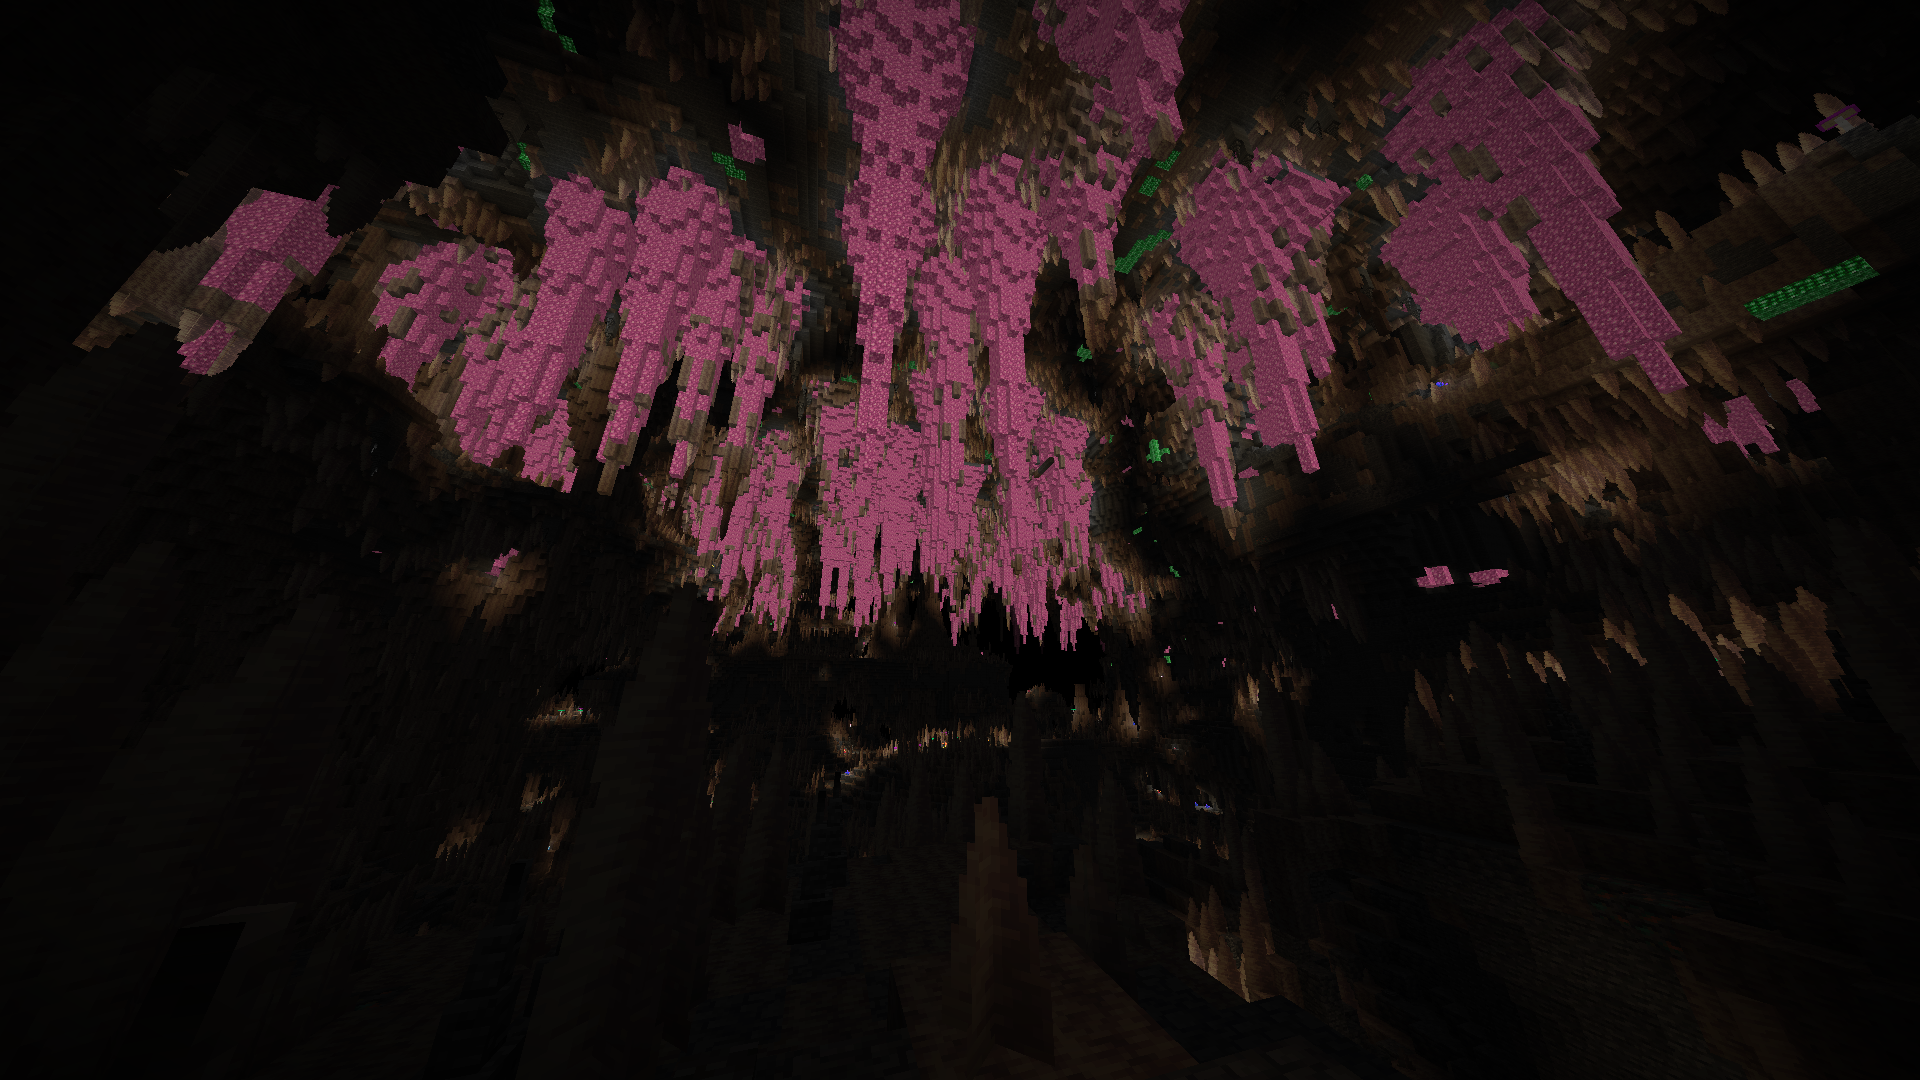 More images here: https://www.curseforge.com/minecraft/mc-mods/infinite-abyss/screenshots